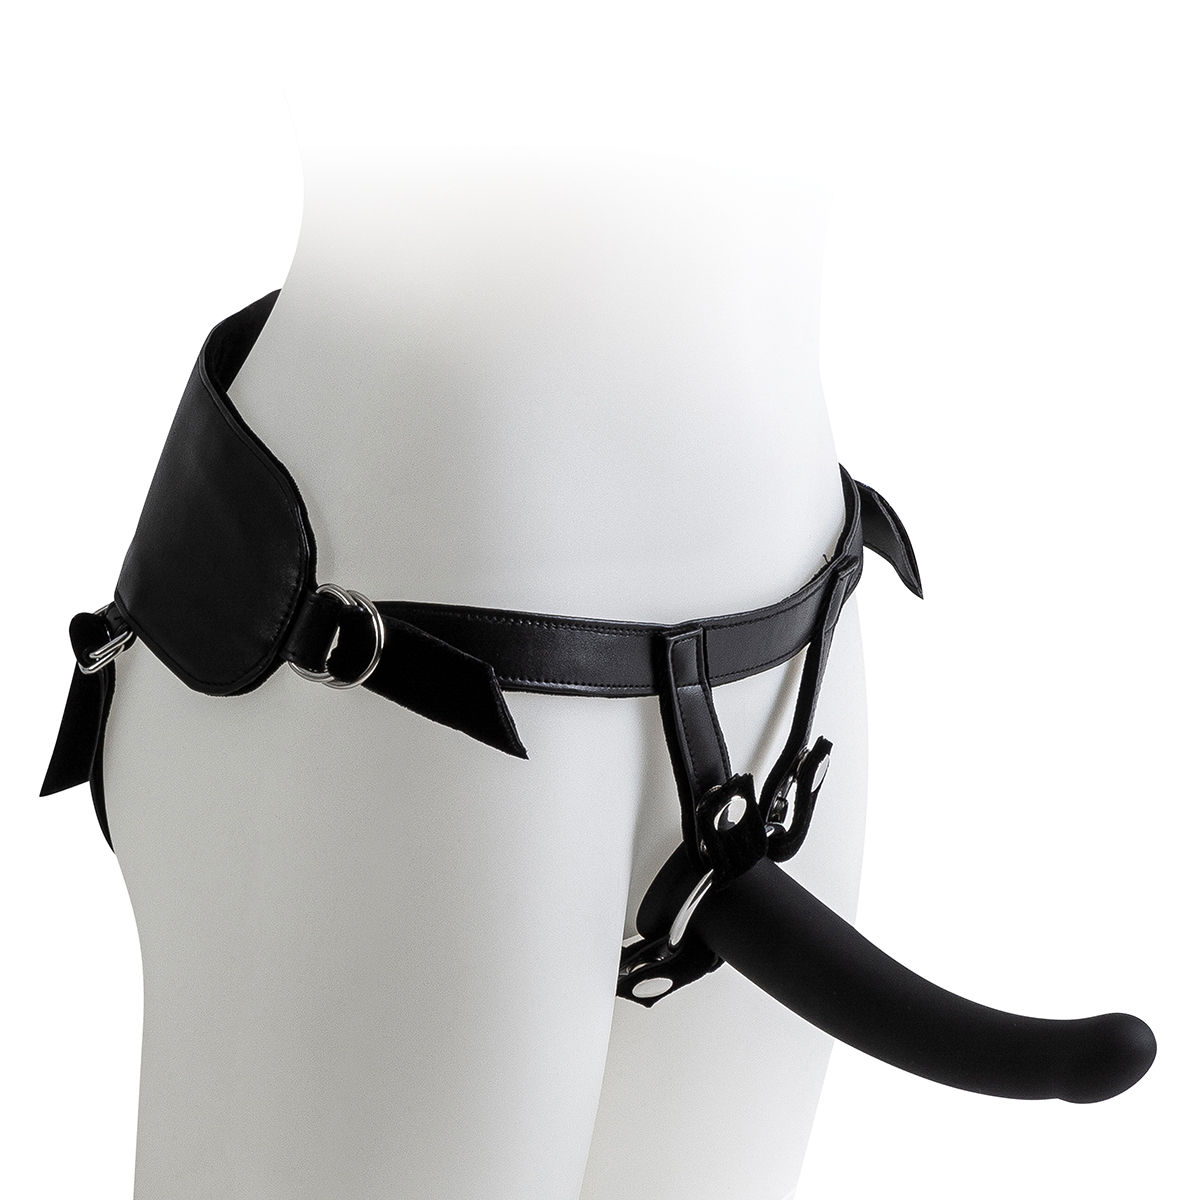 Harness with Black Dildo – Size L